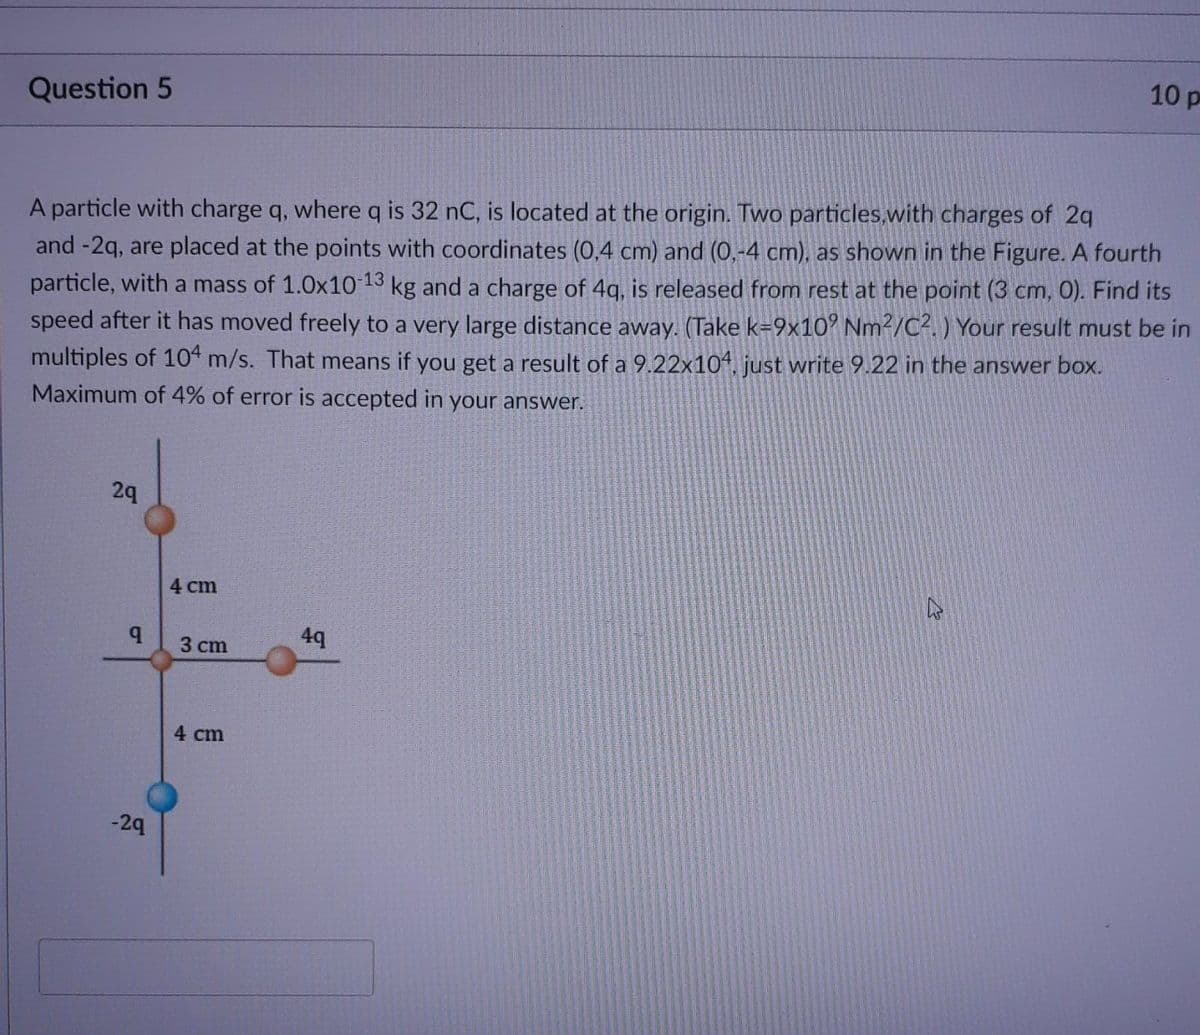 10 p
Question 5
A particle with charge q, where q is 32 nC, is located at the origin. Two particles,with charges of 2q
and -2q, are placed at the points with coordinates (0,4 cm) and (0,-4 cm), as shown in the Figure. A fourth
particle, with a mass of 1.0x10 13 kg and a charge of 4g, is released from rest at the point (3 cm, 0). Find its
speed after it has moved freely to a very large distance away. (Take k=9x10' Nm²/C². ) Your result must be in
multiples of 104 m/s. That means if you get a result of a 9.22x104, just write 9.22 in the answer box.
Maximum of 4% of error is accepted in your answer.
29
4 cm
4q
3 cm
4 cm
-29
